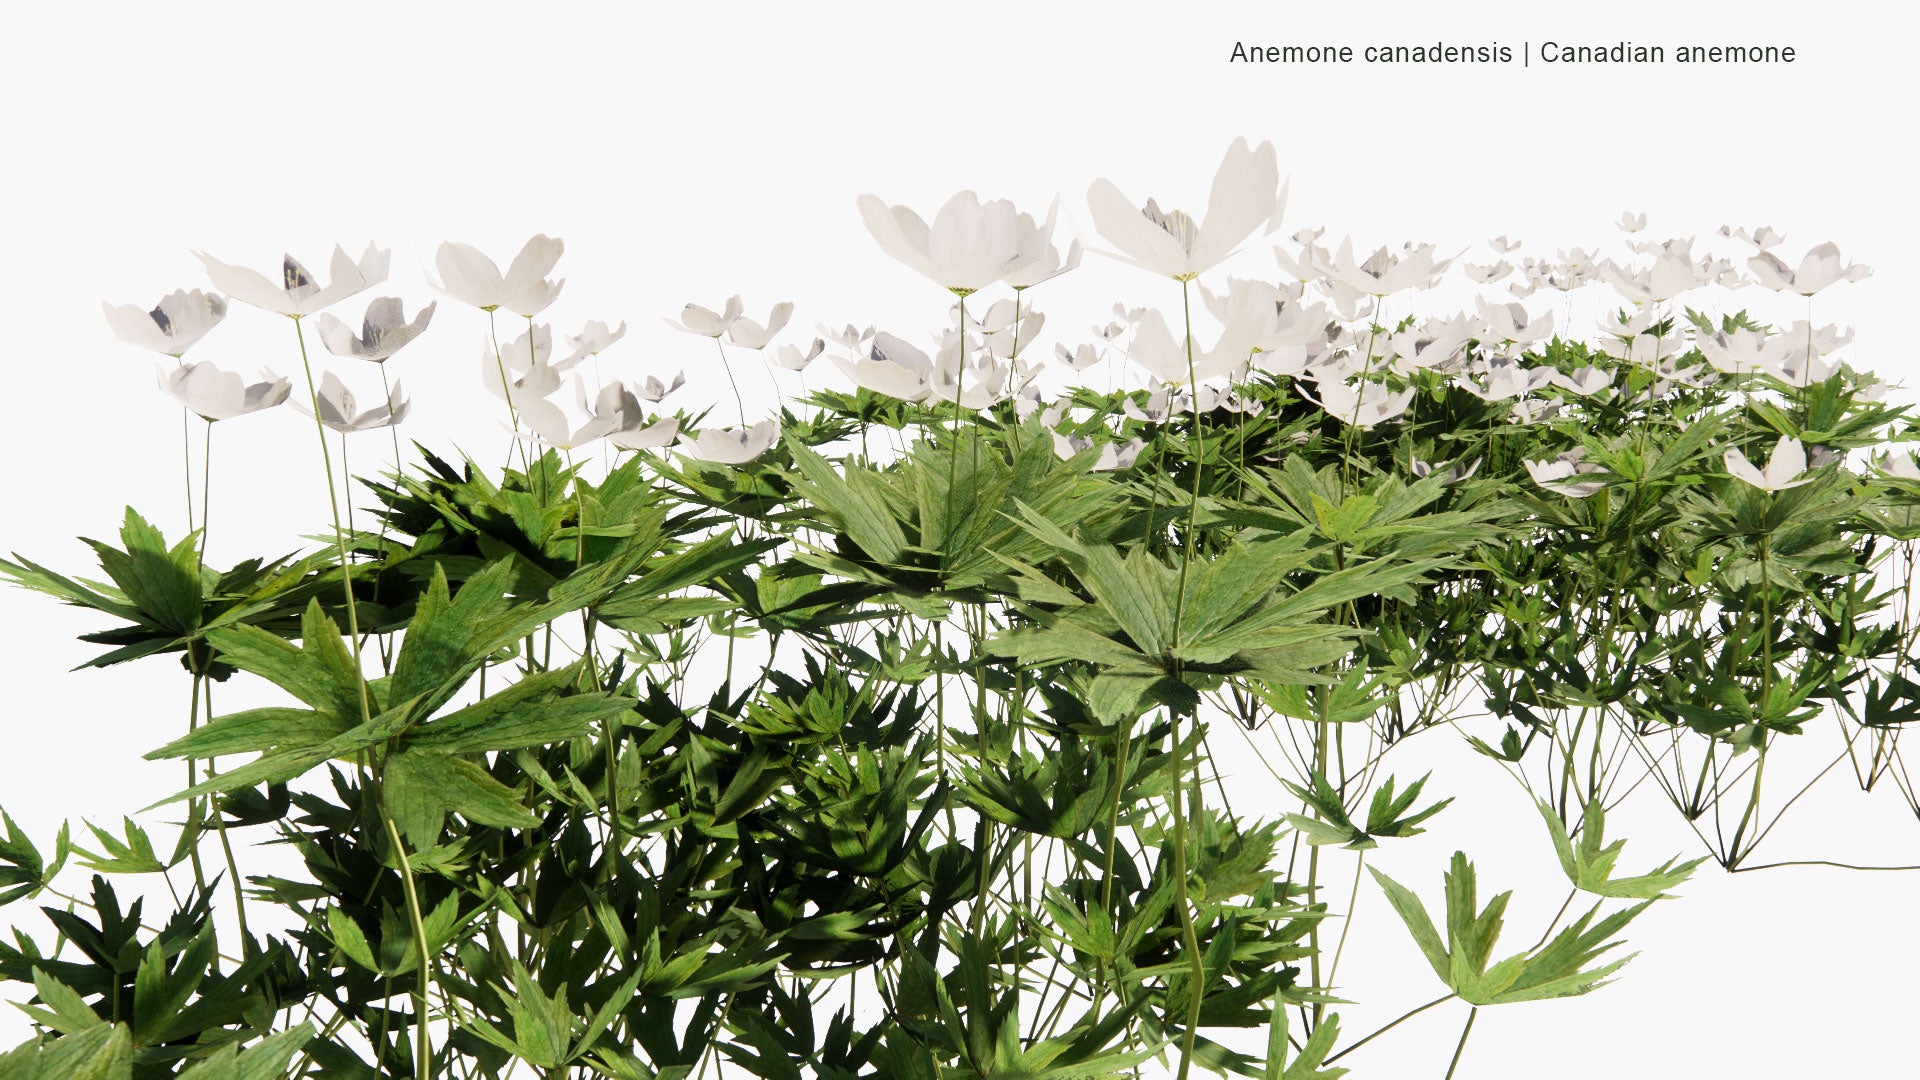 Low Poly Anemone Canadensis - Canada Anemone, Round-Headed Anemone, Meadow Anemone, Windflower, Crowfoot (3D Model)